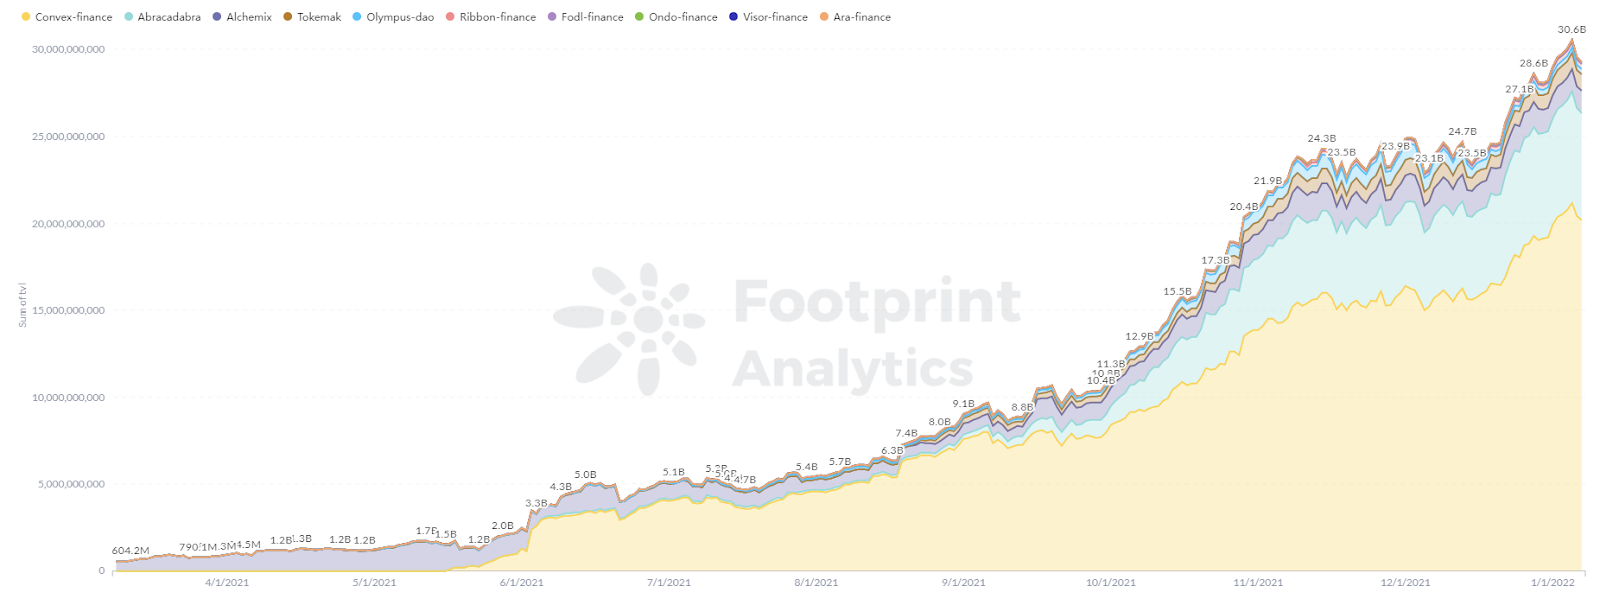 Footprint Analytics - TVL of DeFi 2.0 Projects soared from 0 to 30 Billion in 2021